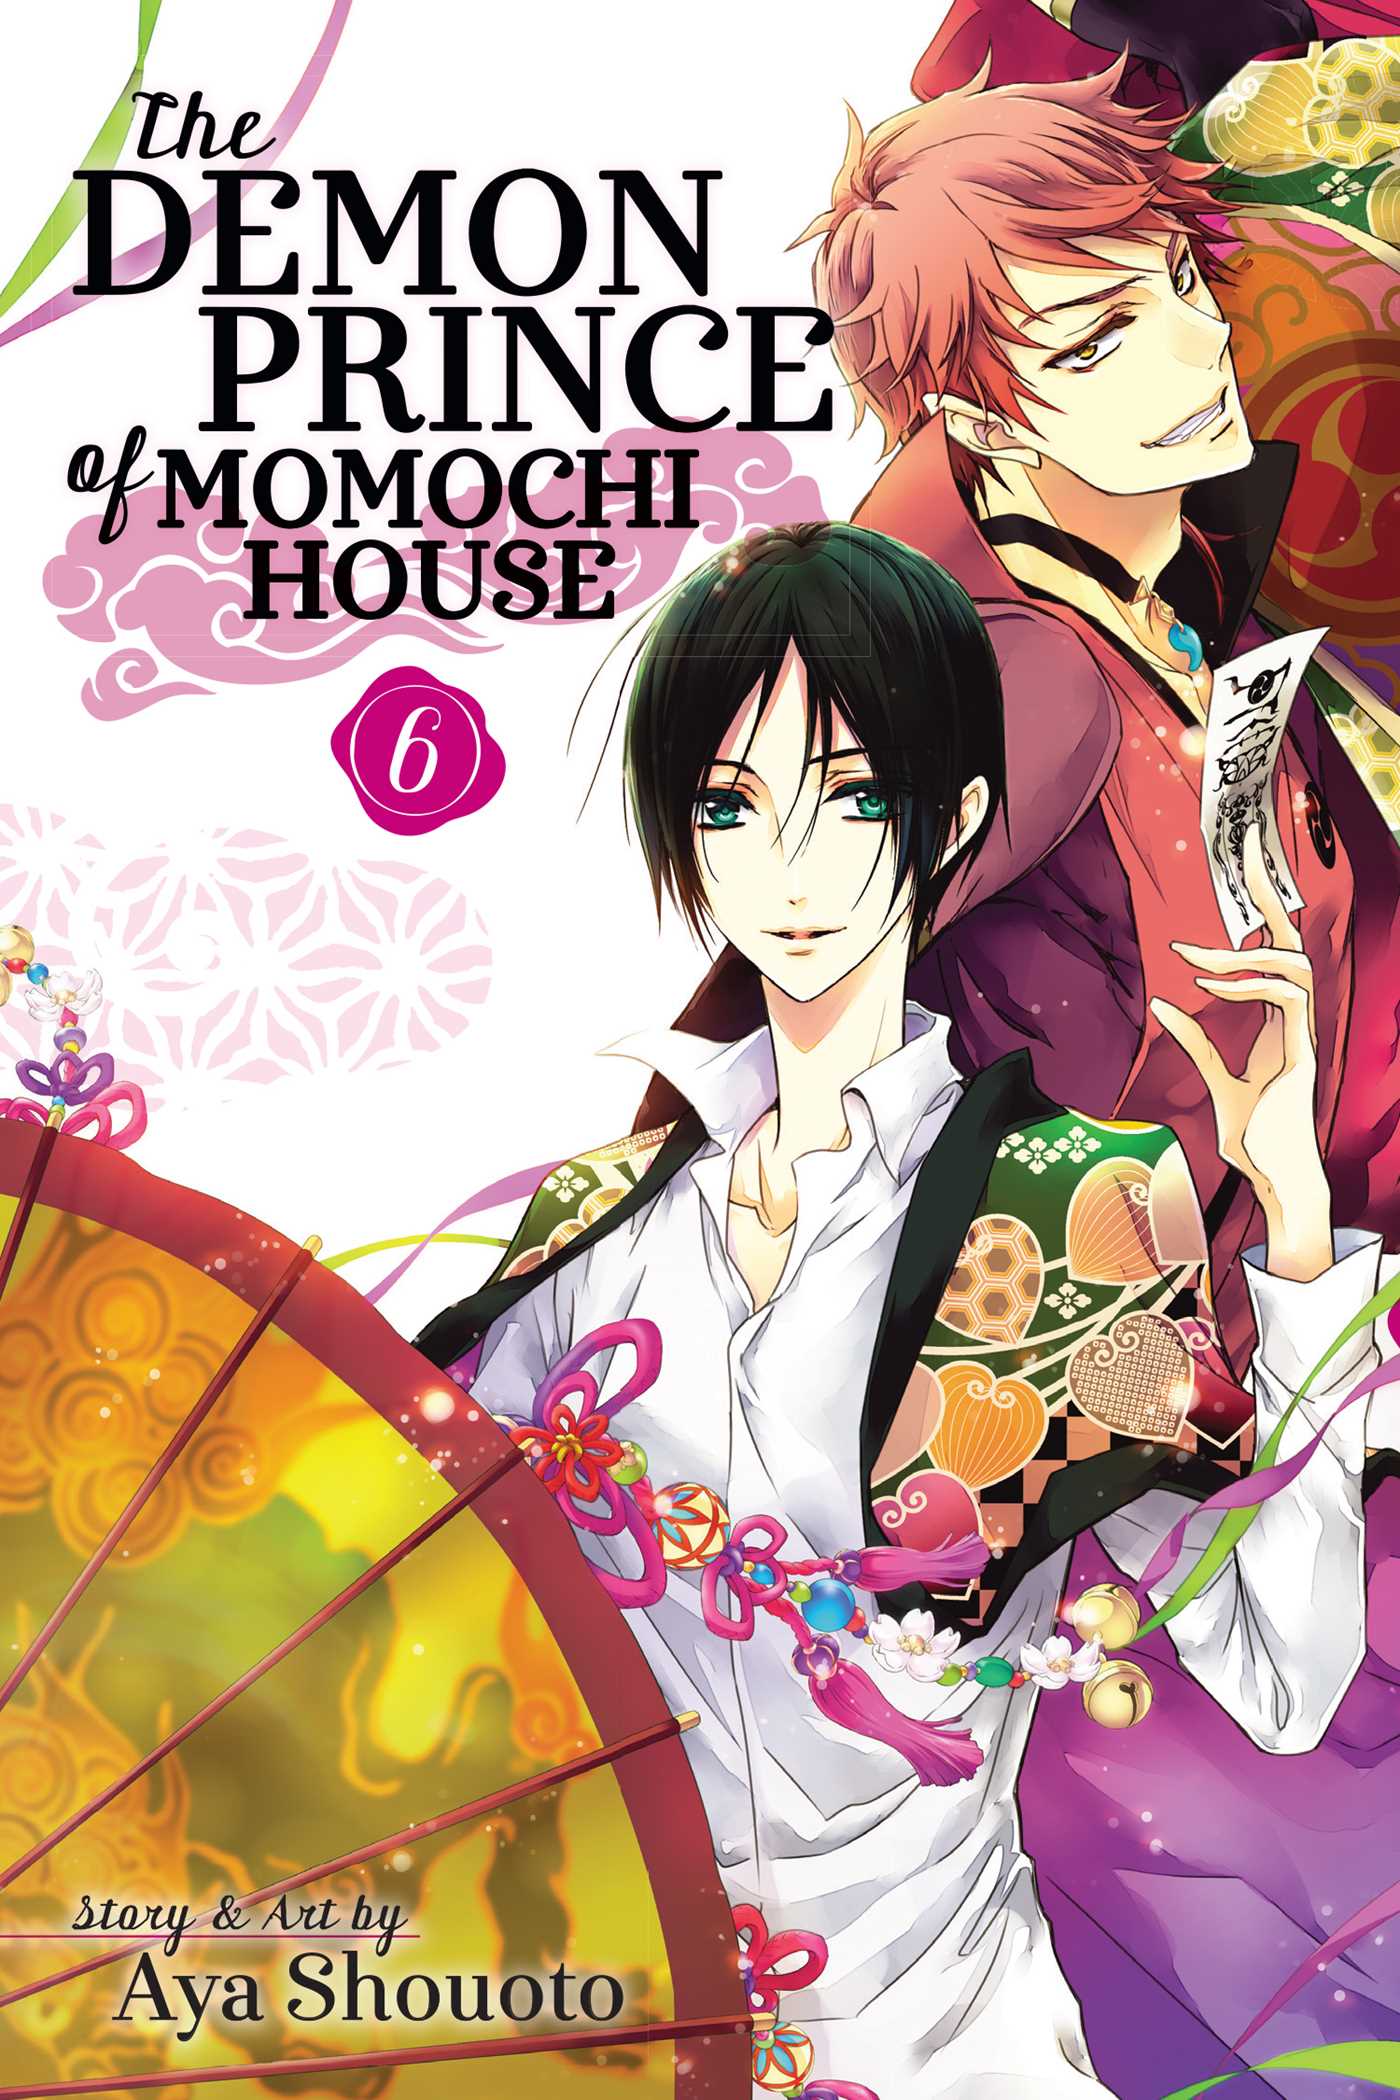 The Demon Prince of Momochi House - Volume 6